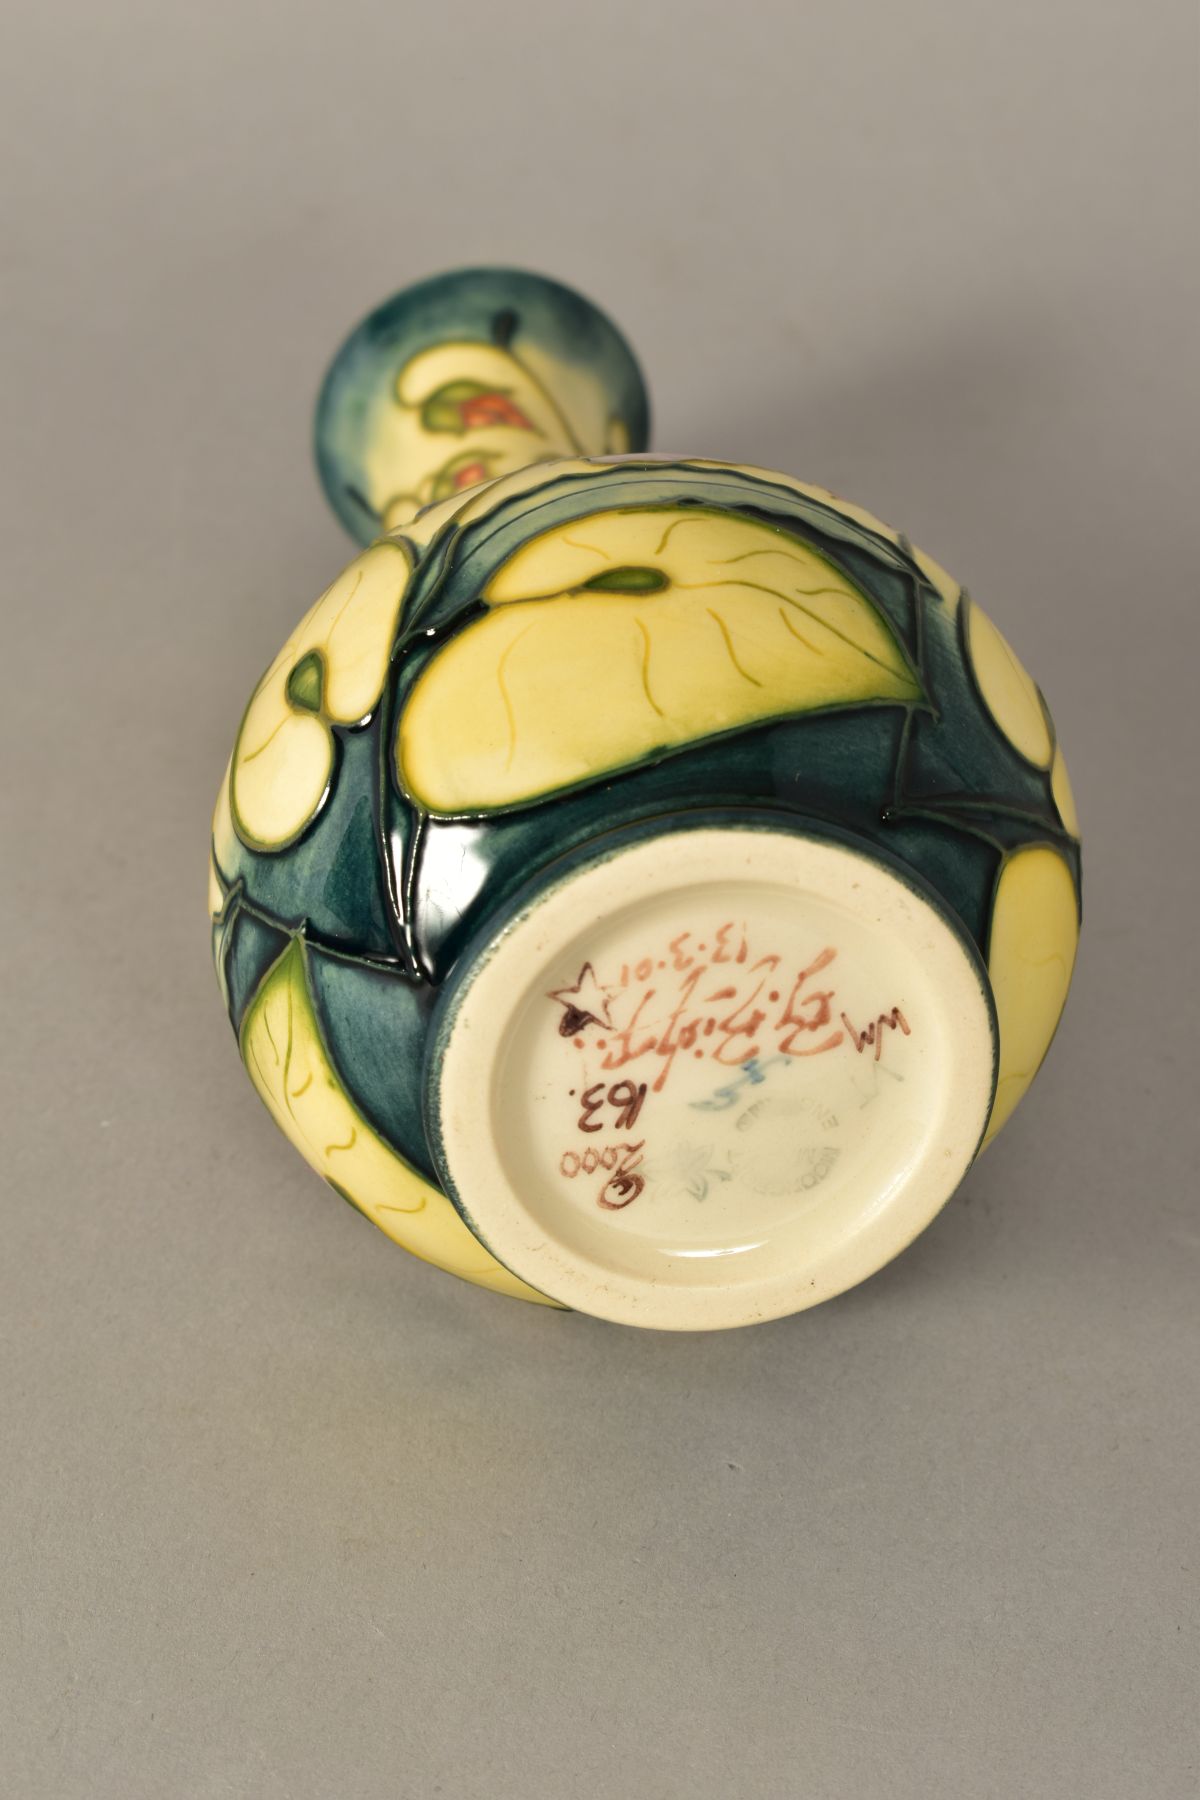 A MOORCROFT POTTERY BUD VASE, 'Sweet Thief' pattern, signed Rachel Bishop and No163, impressed - Image 8 of 8